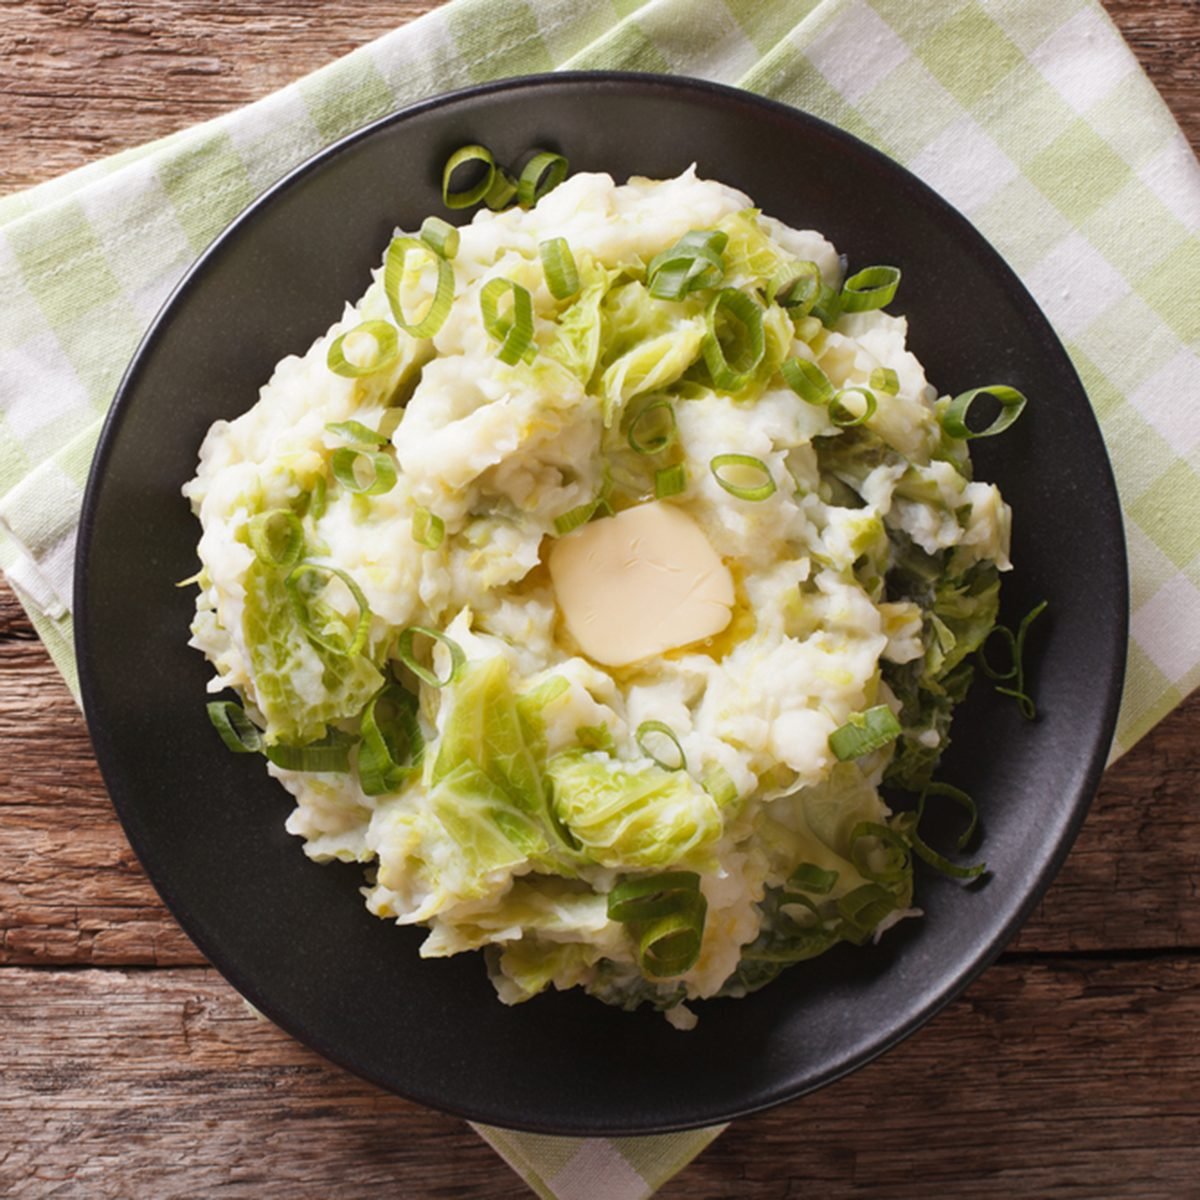 Irish colcannon - mashed potatoes with savoy cabbage and butter closeup on the table. horizontal view from above; Shutterstock ID 475578826